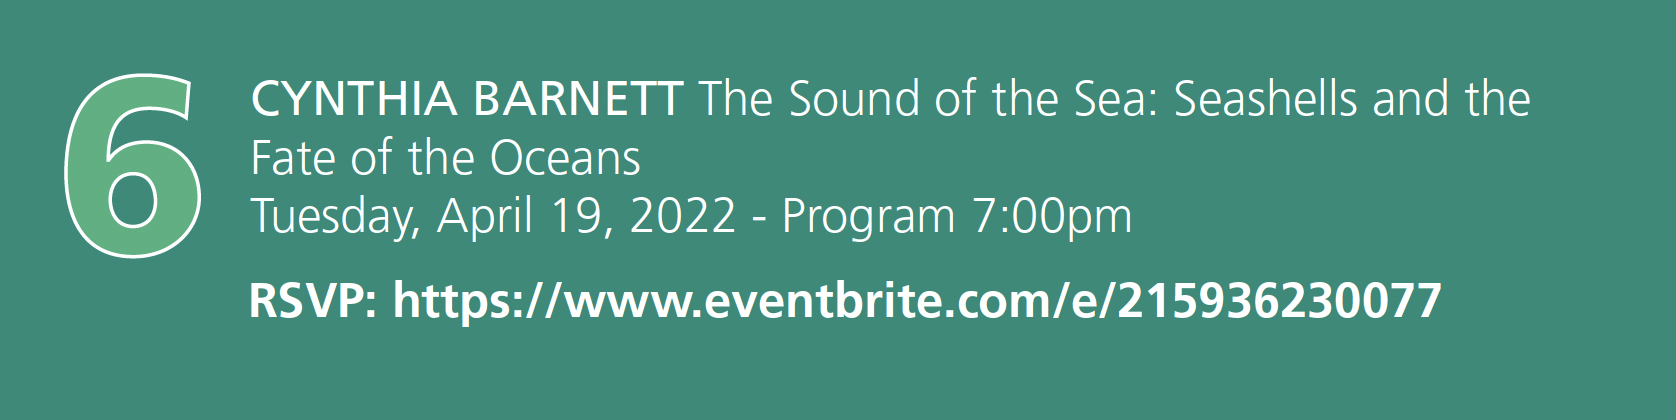 - Number 6. Cynthia Barnett, The Sound of Seashells and the Fate of the Oceans. Tuesday, April 19th, 2022 Program 7:00pm RSVP: event registration link embedded in image